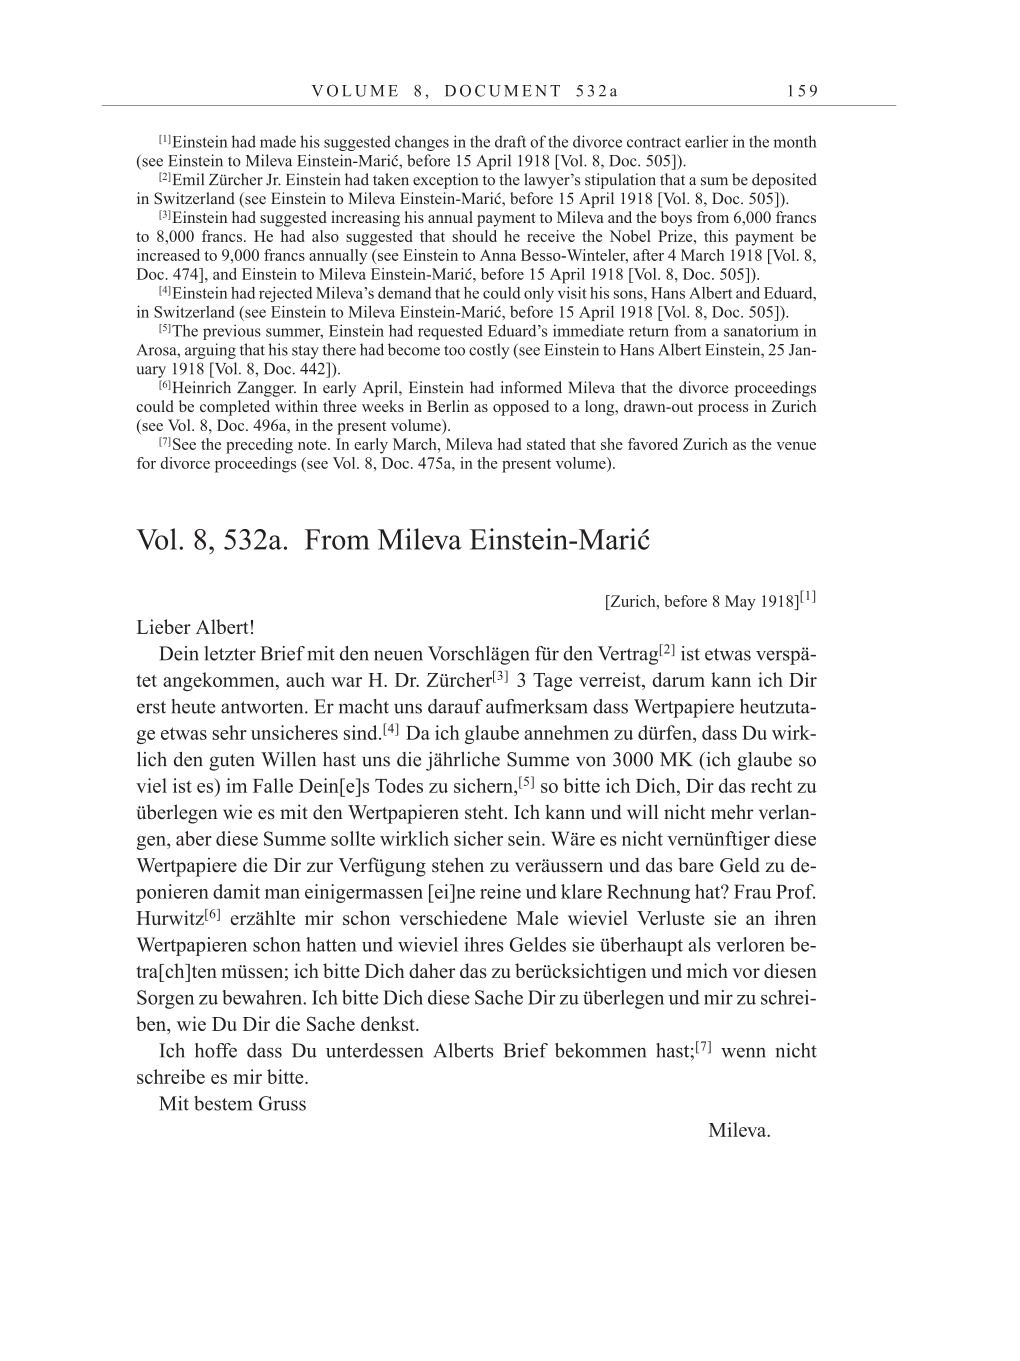 Volume 10: The Berlin Years: Correspondence May-December 1920 / Supplementary Correspondence 1909-1920 page 159